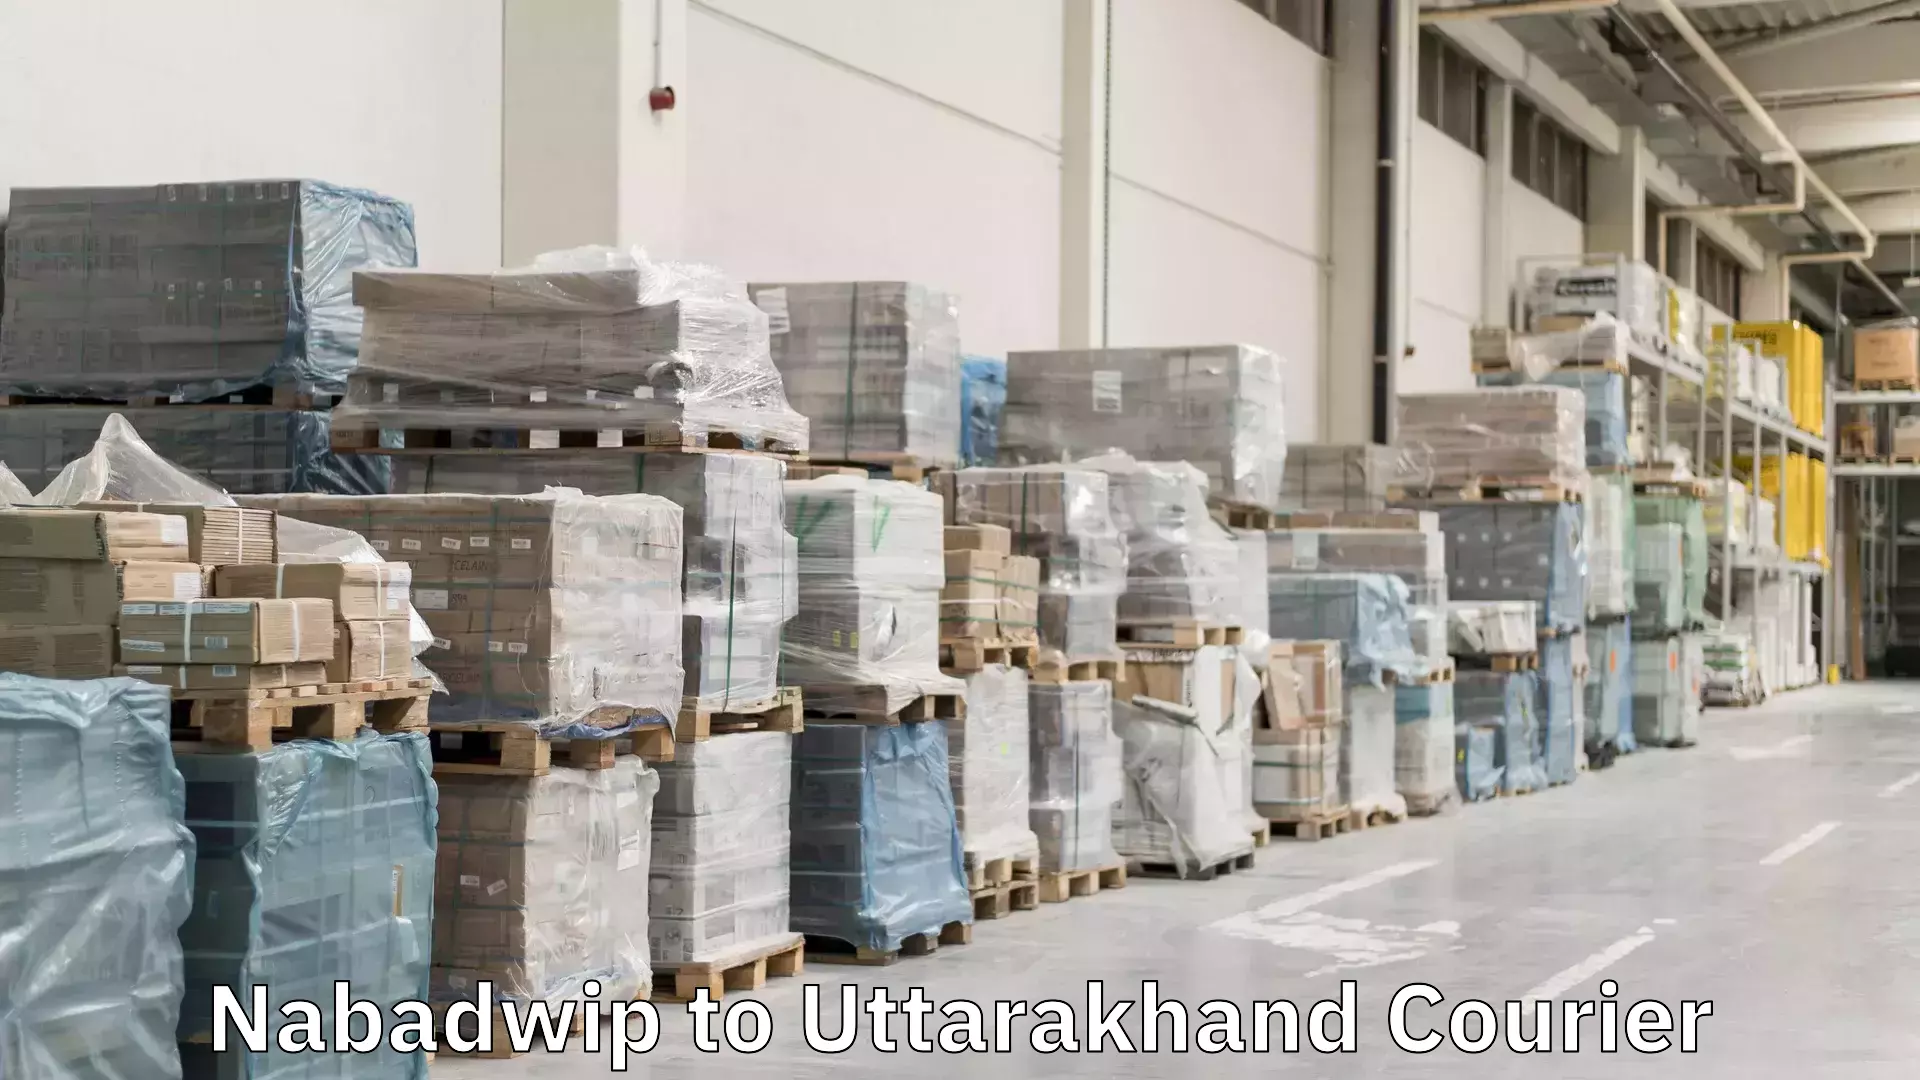 Courier service efficiency Nabadwip to Uttarakhand